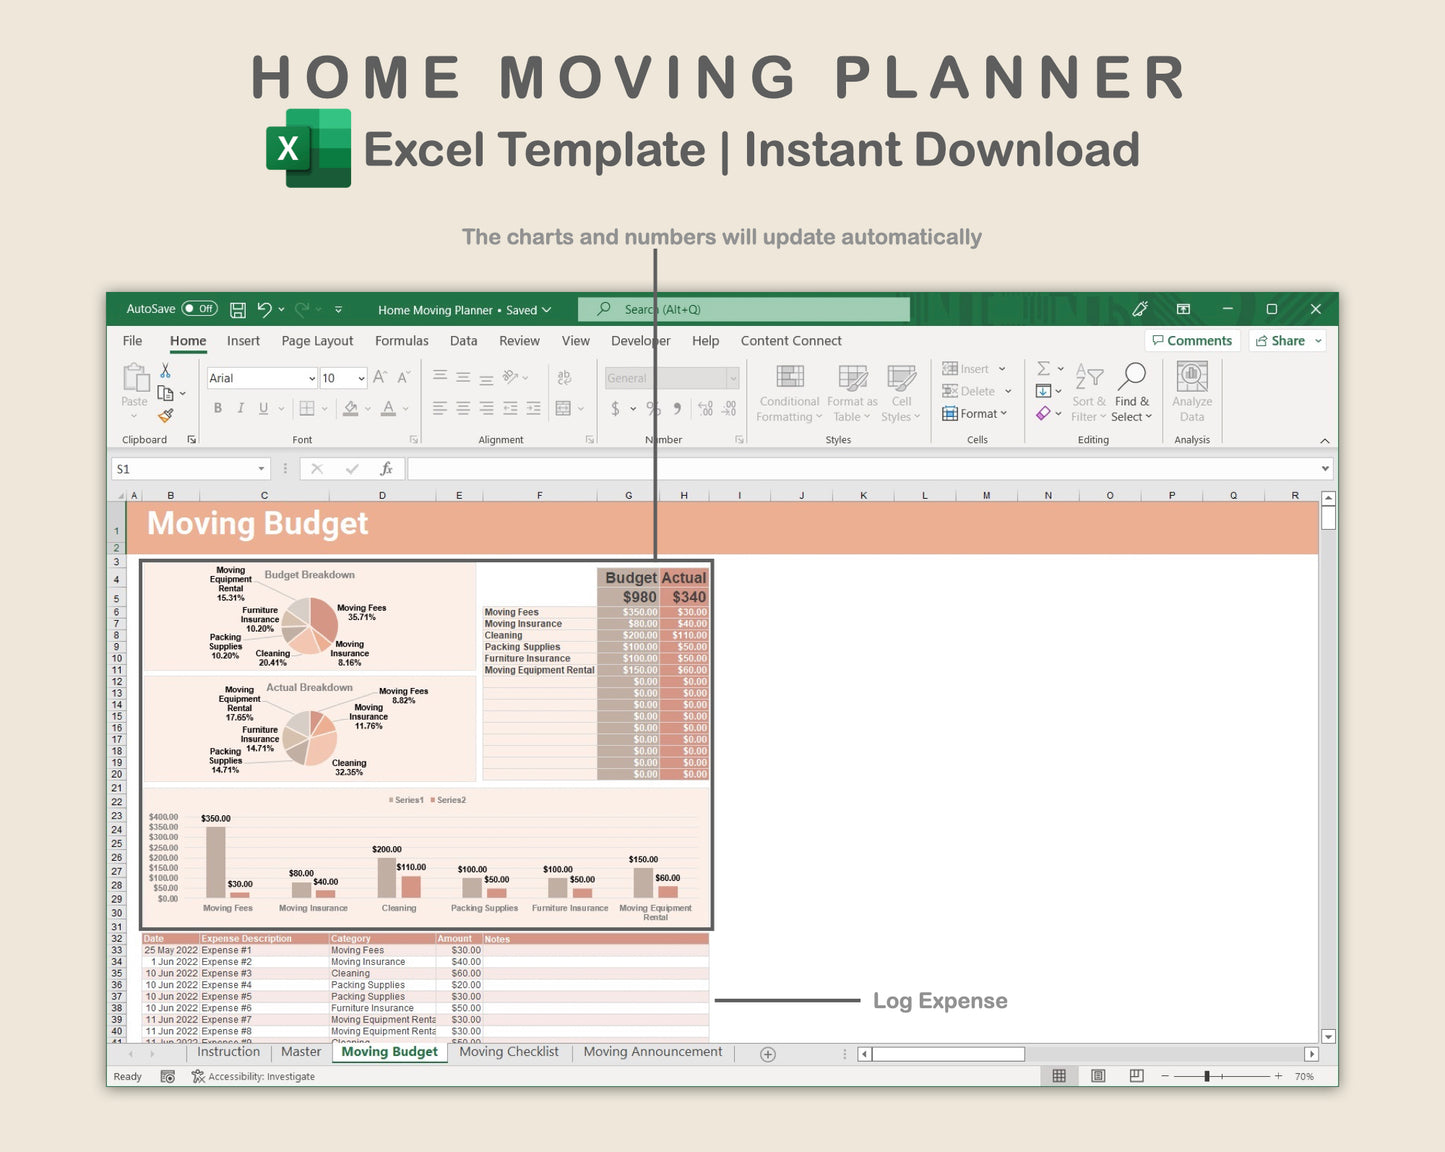 Excel - Home Moving Planner - Neutral